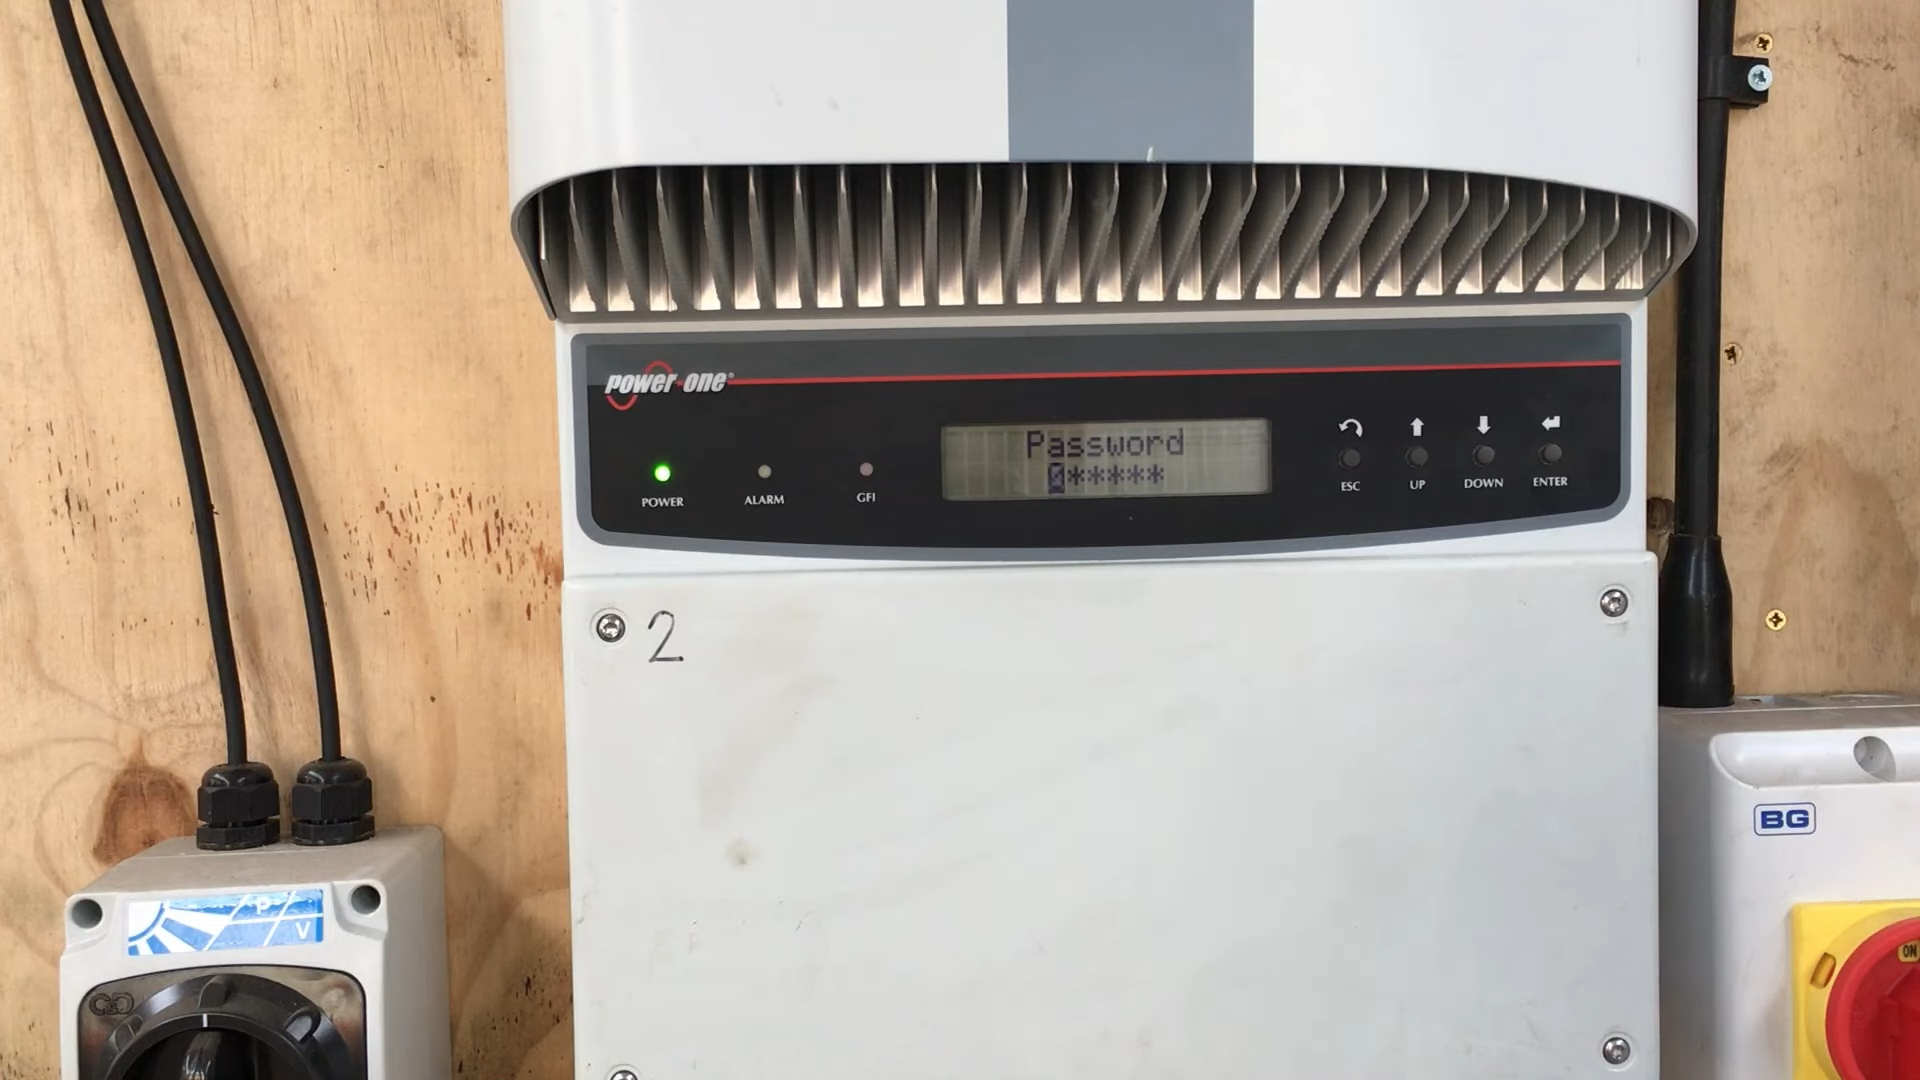 A solar inverter that asks for a password on its display